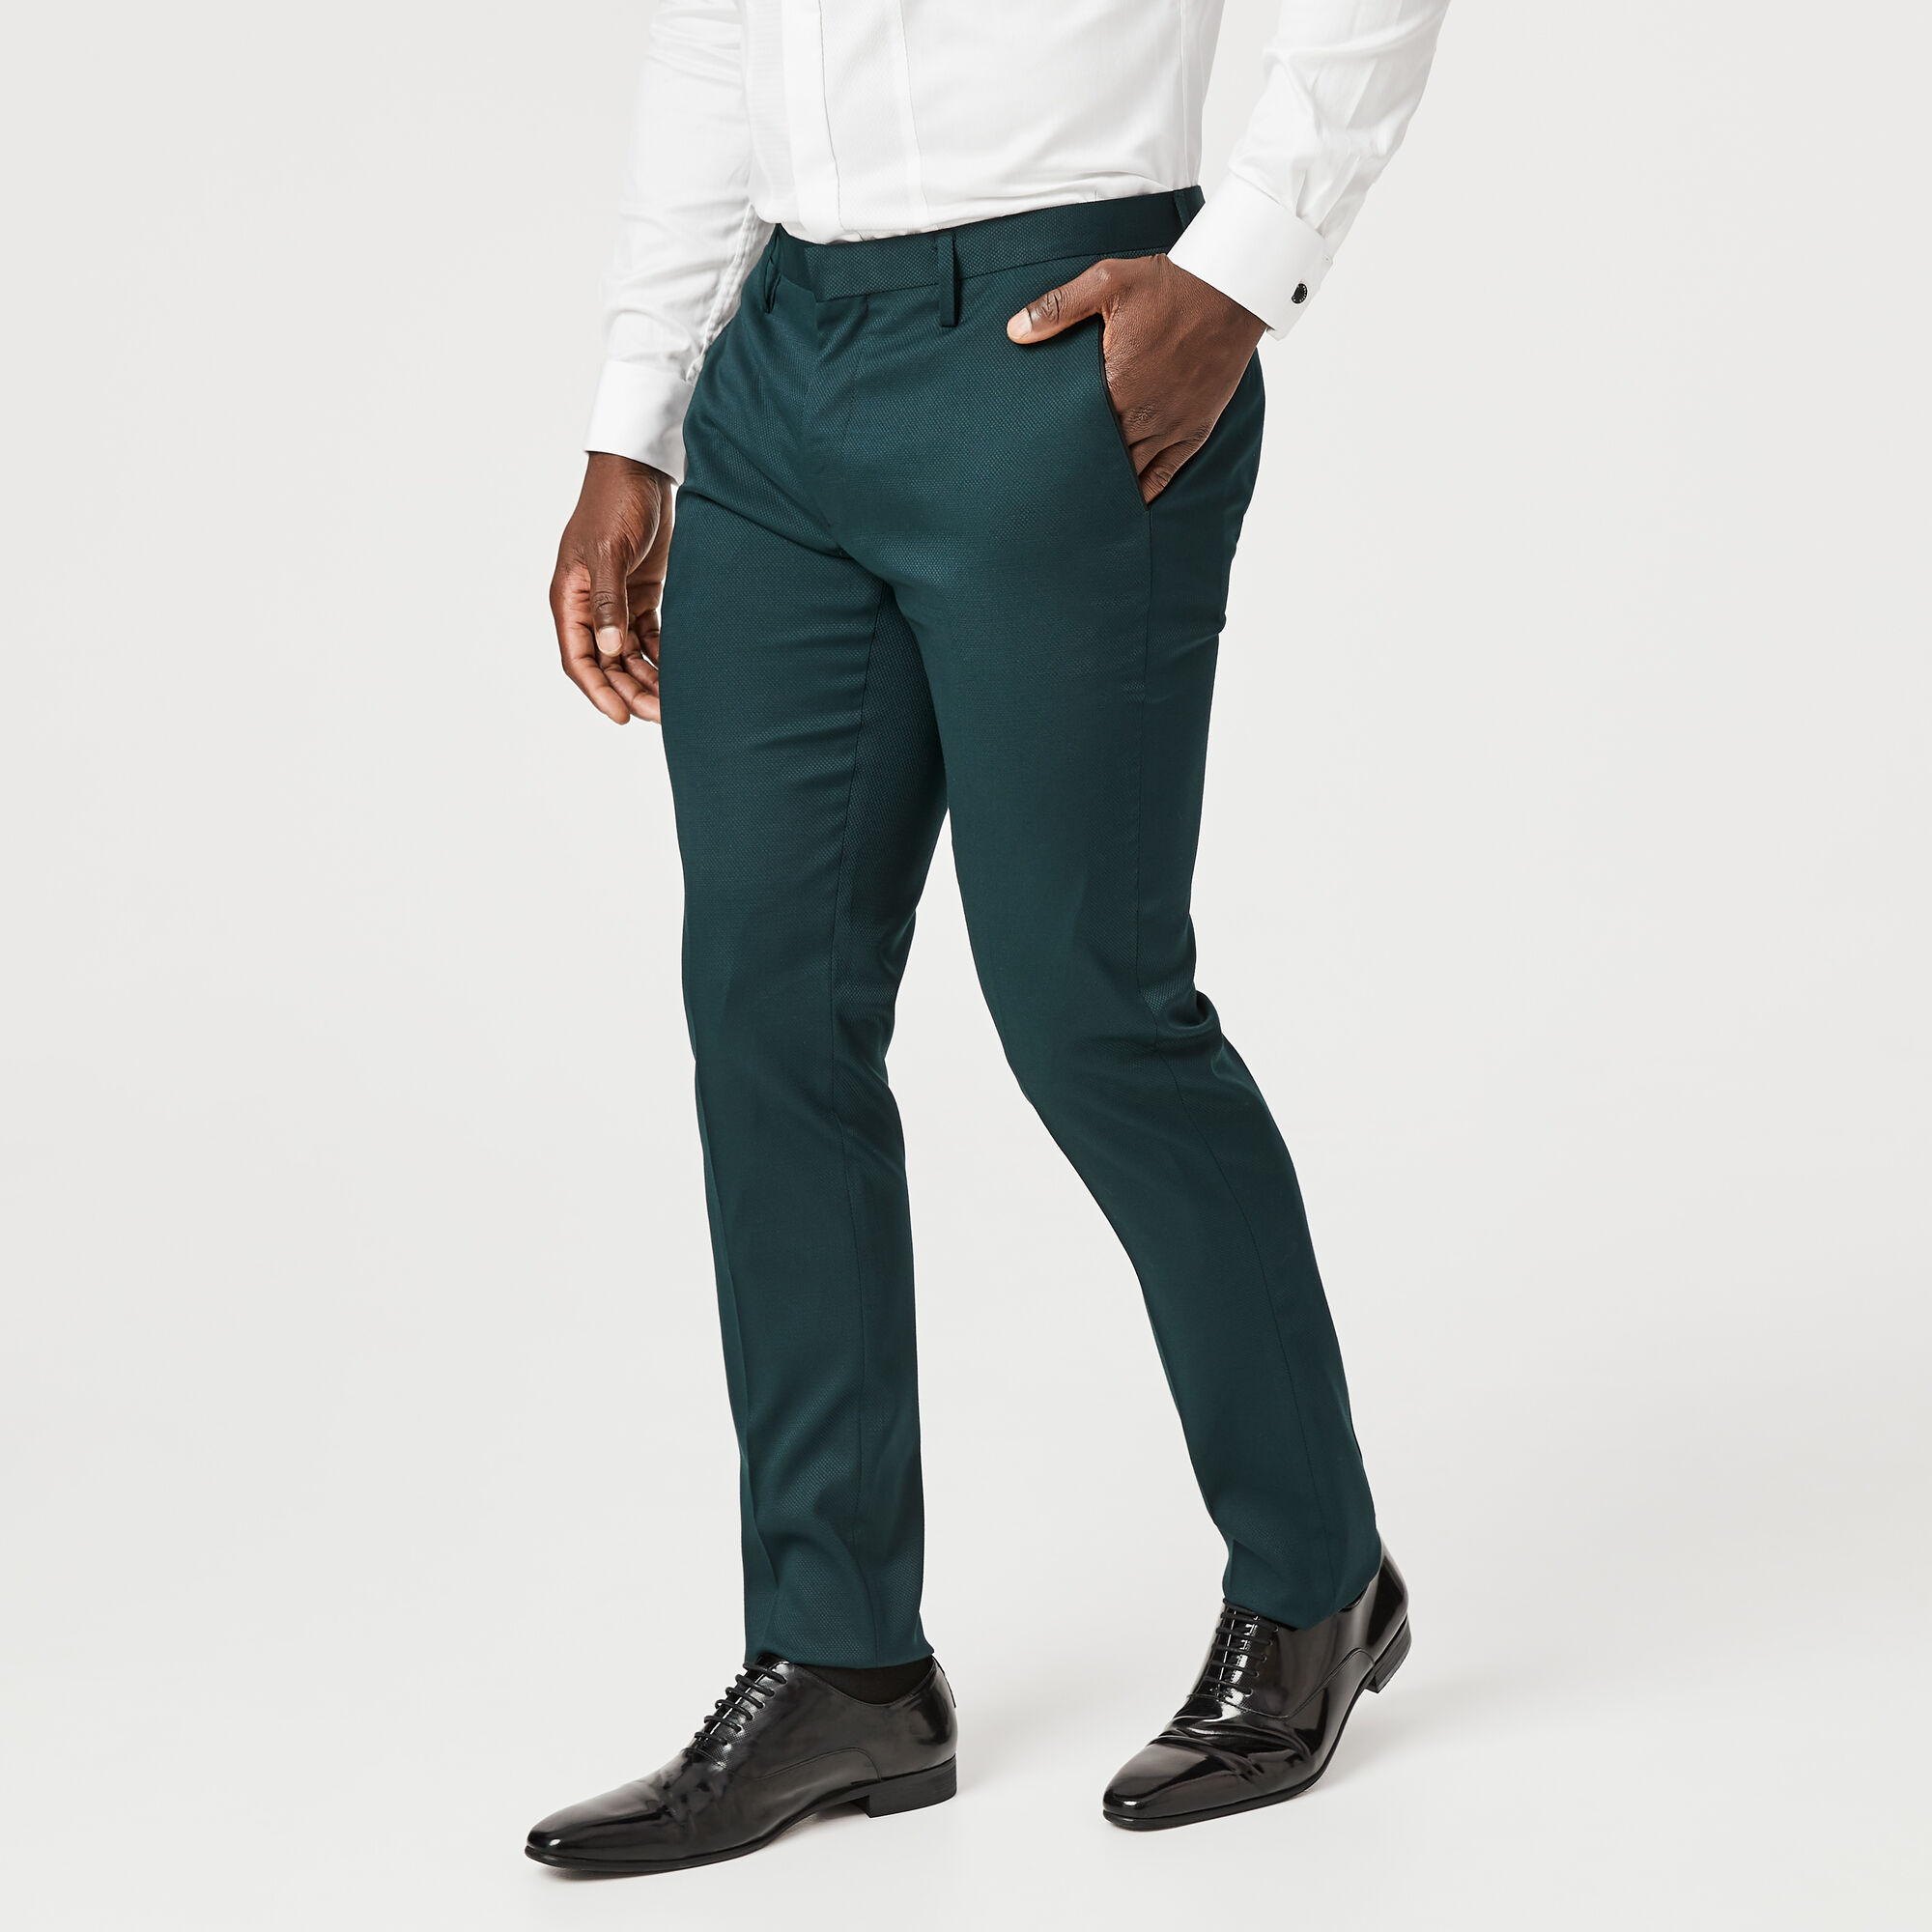 English Tailored Pant - Teal - Black Tie Formal Pants Green | Suit ...